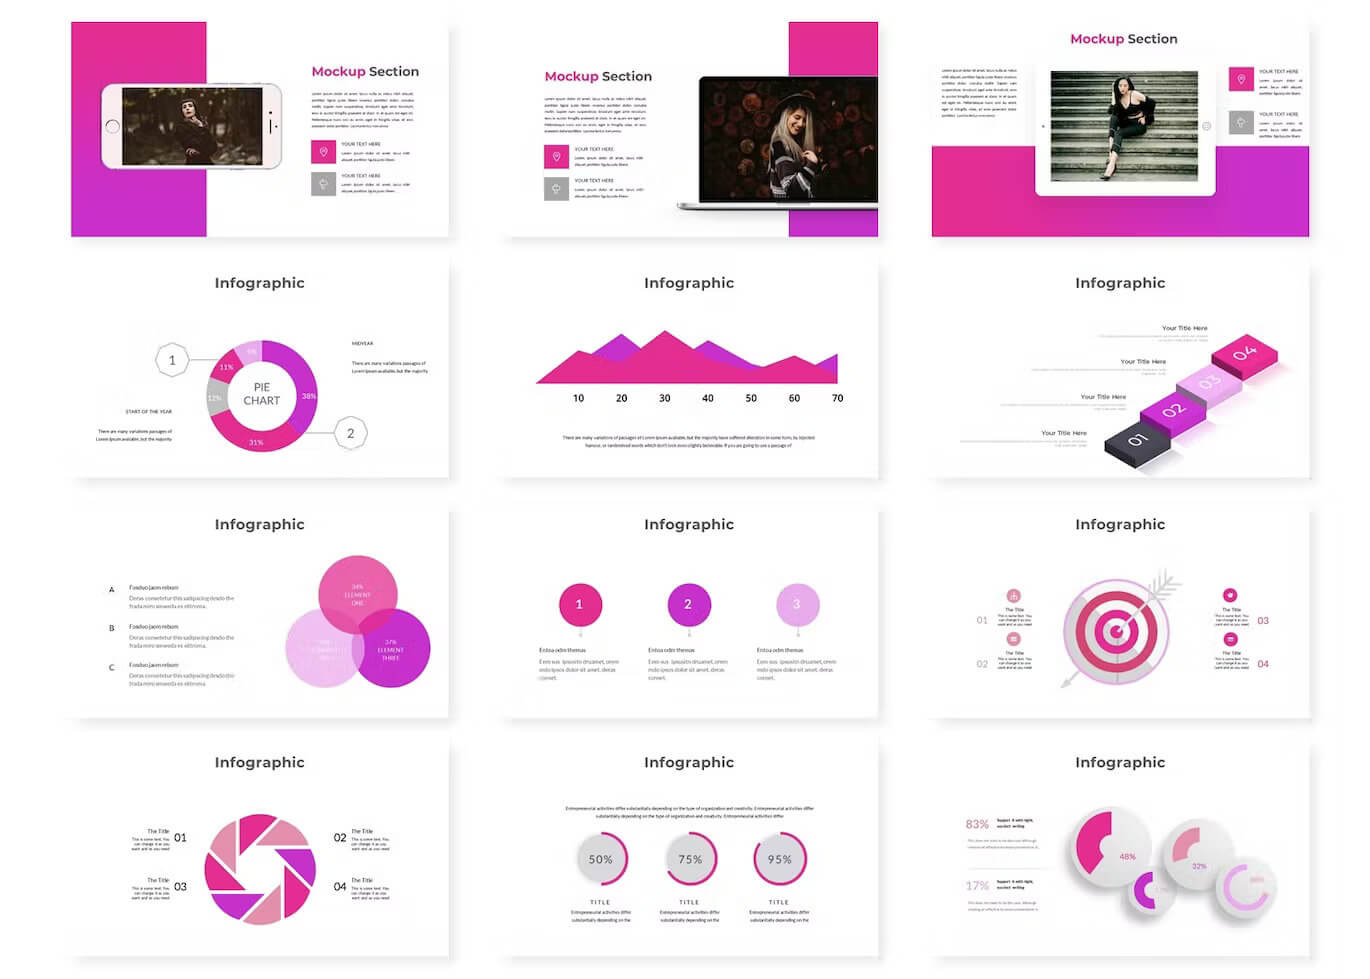 Many slides with information about mockup section and infographic.